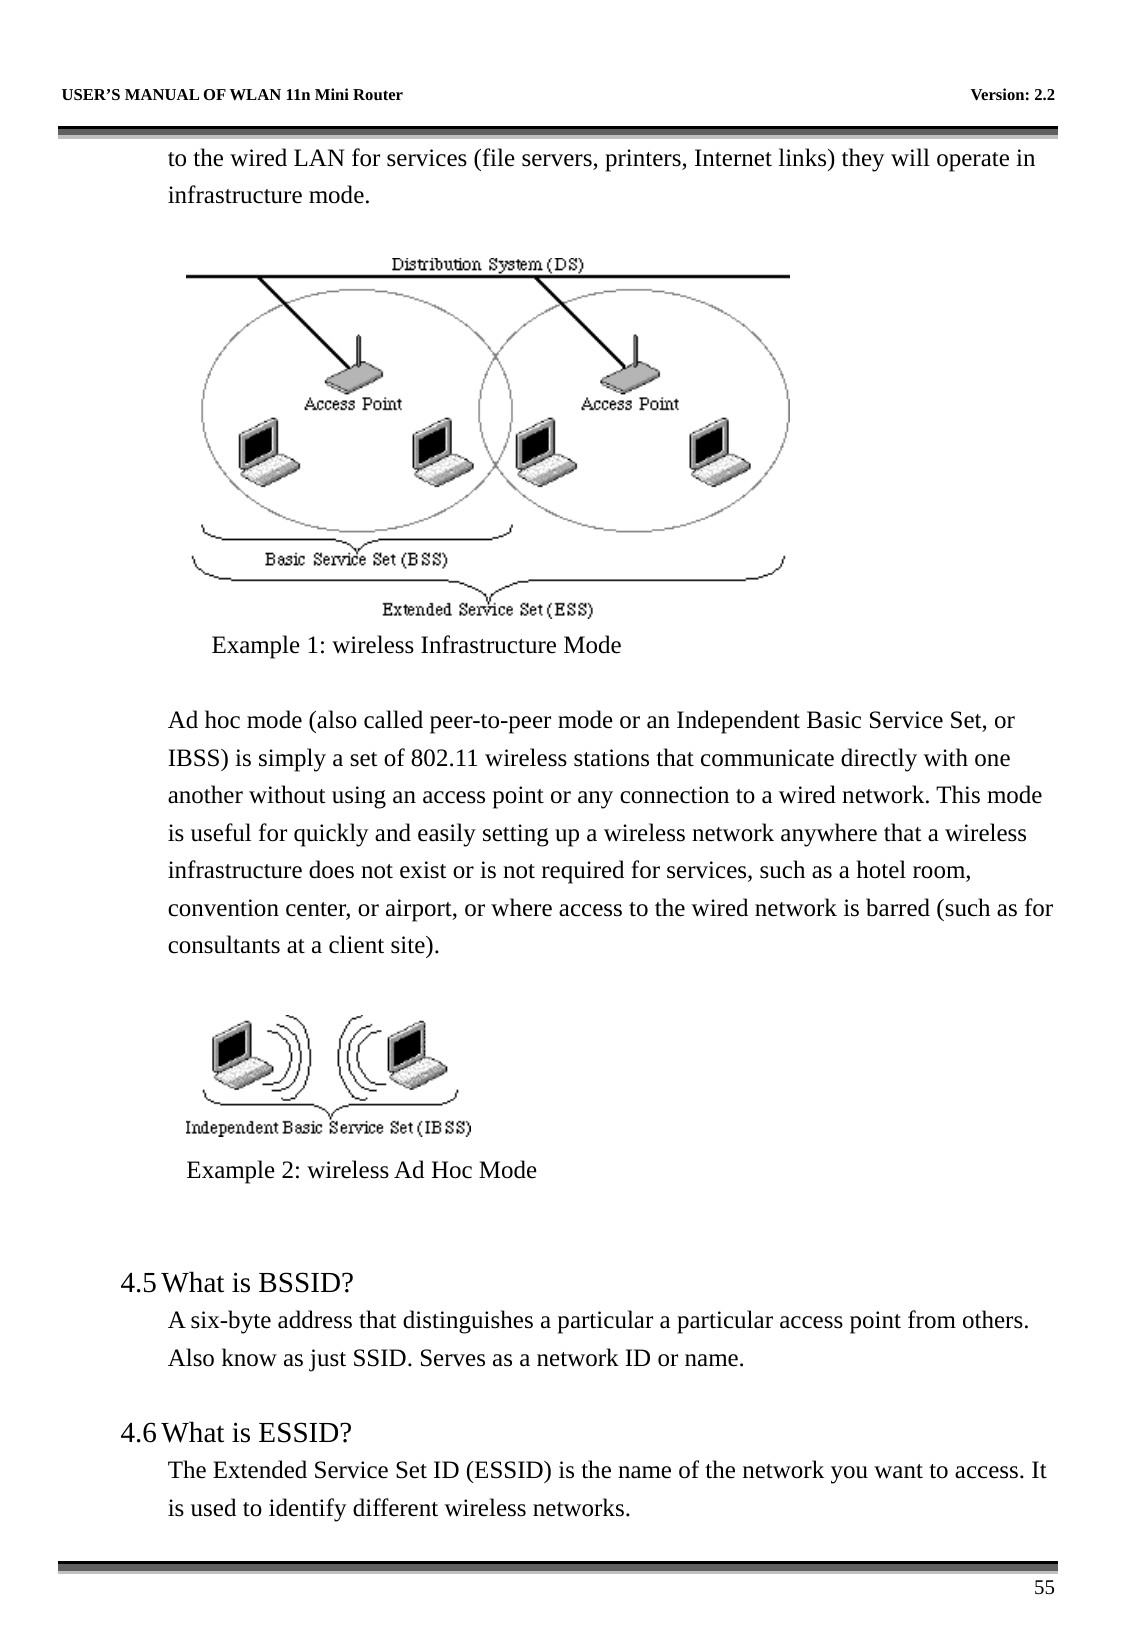   USER’S MANUAL OF WLAN 11n Mini Router    Version: 2.2      55 to the wired LAN for services (file servers, printers, Internet links) they will operate in infrastructure mode.     Example 1: wireless Infrastructure Mode  Ad hoc mode (also called peer-to-peer mode or an Independent Basic Service Set, or IBSS) is simply a set of 802.11 wireless stations that communicate directly with one another without using an access point or any connection to a wired network. This mode is useful for quickly and easily setting up a wireless network anywhere that a wireless infrastructure does not exist or is not required for services, such as a hotel room, convention center, or airport, or where access to the wired network is barred (such as for consultants at a client site).     Example 2: wireless Ad Hoc Mode   4.5 What is BSSID?   A six-byte address that distinguishes a particular a particular access point from others. Also know as just SSID. Serves as a network ID or name.    4.6 What is ESSID?   The Extended Service Set ID (ESSID) is the name of the network you want to access. It is used to identify different wireless networks.   